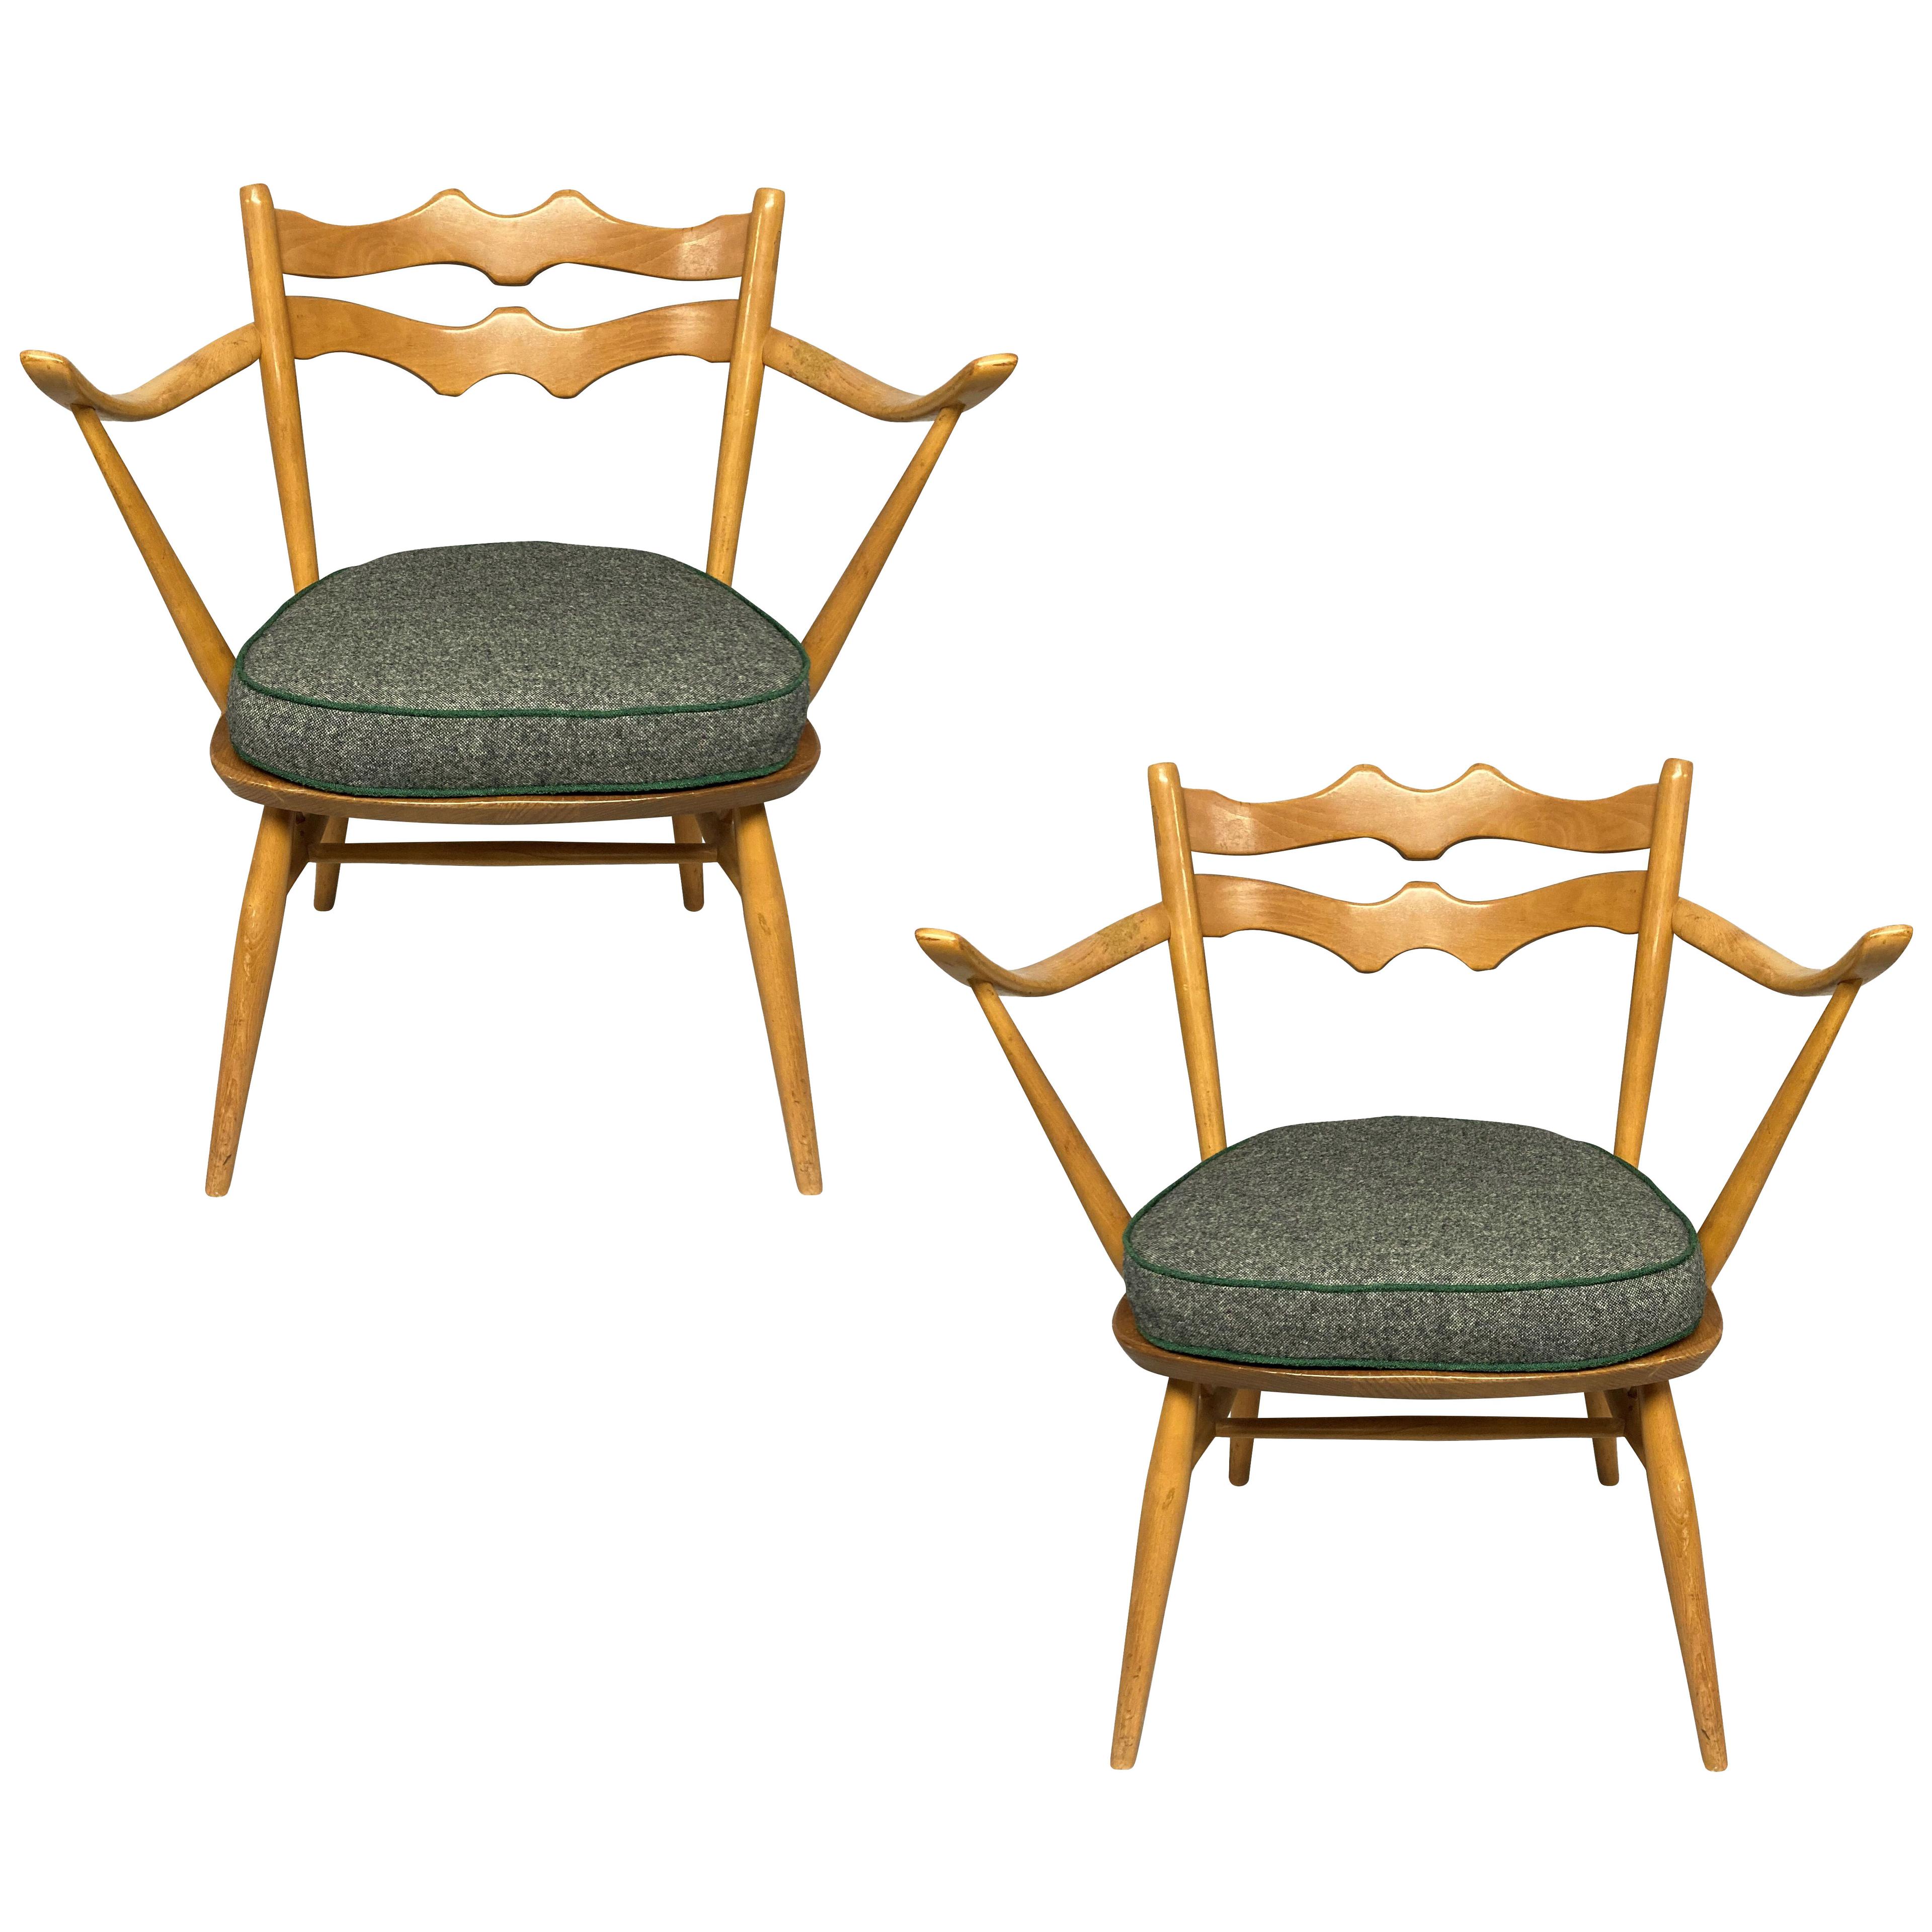 A PAIR OF ENGLISH MID-CENTURY ARMCHAIRS